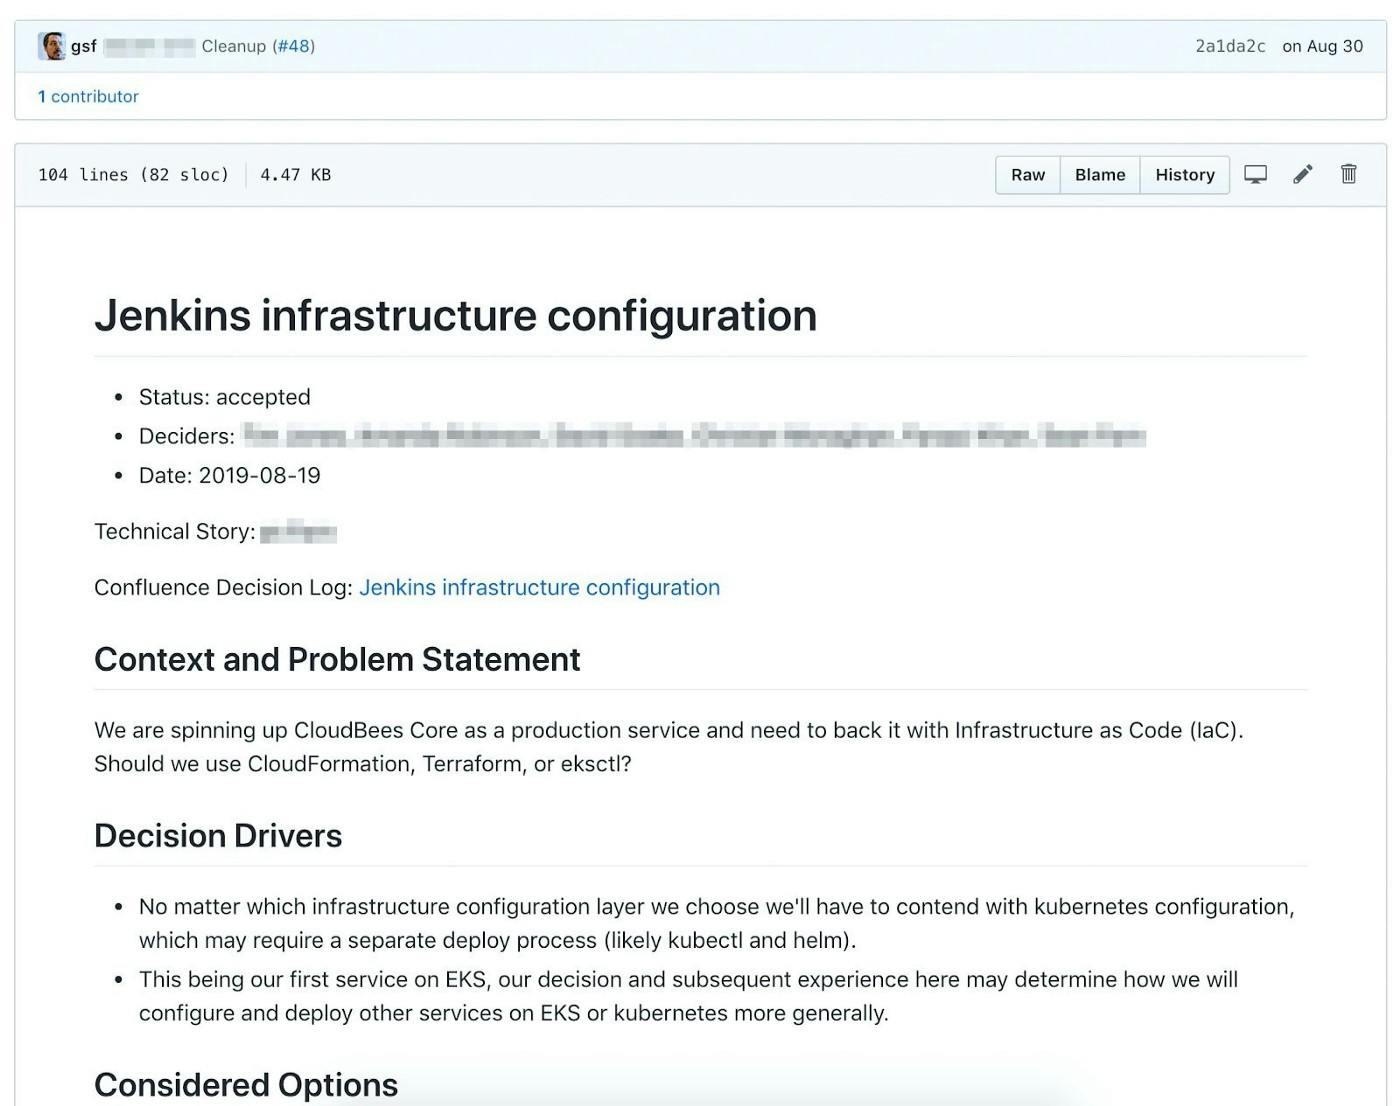 A screenshot of the Jenkins infrastructure configuration record.